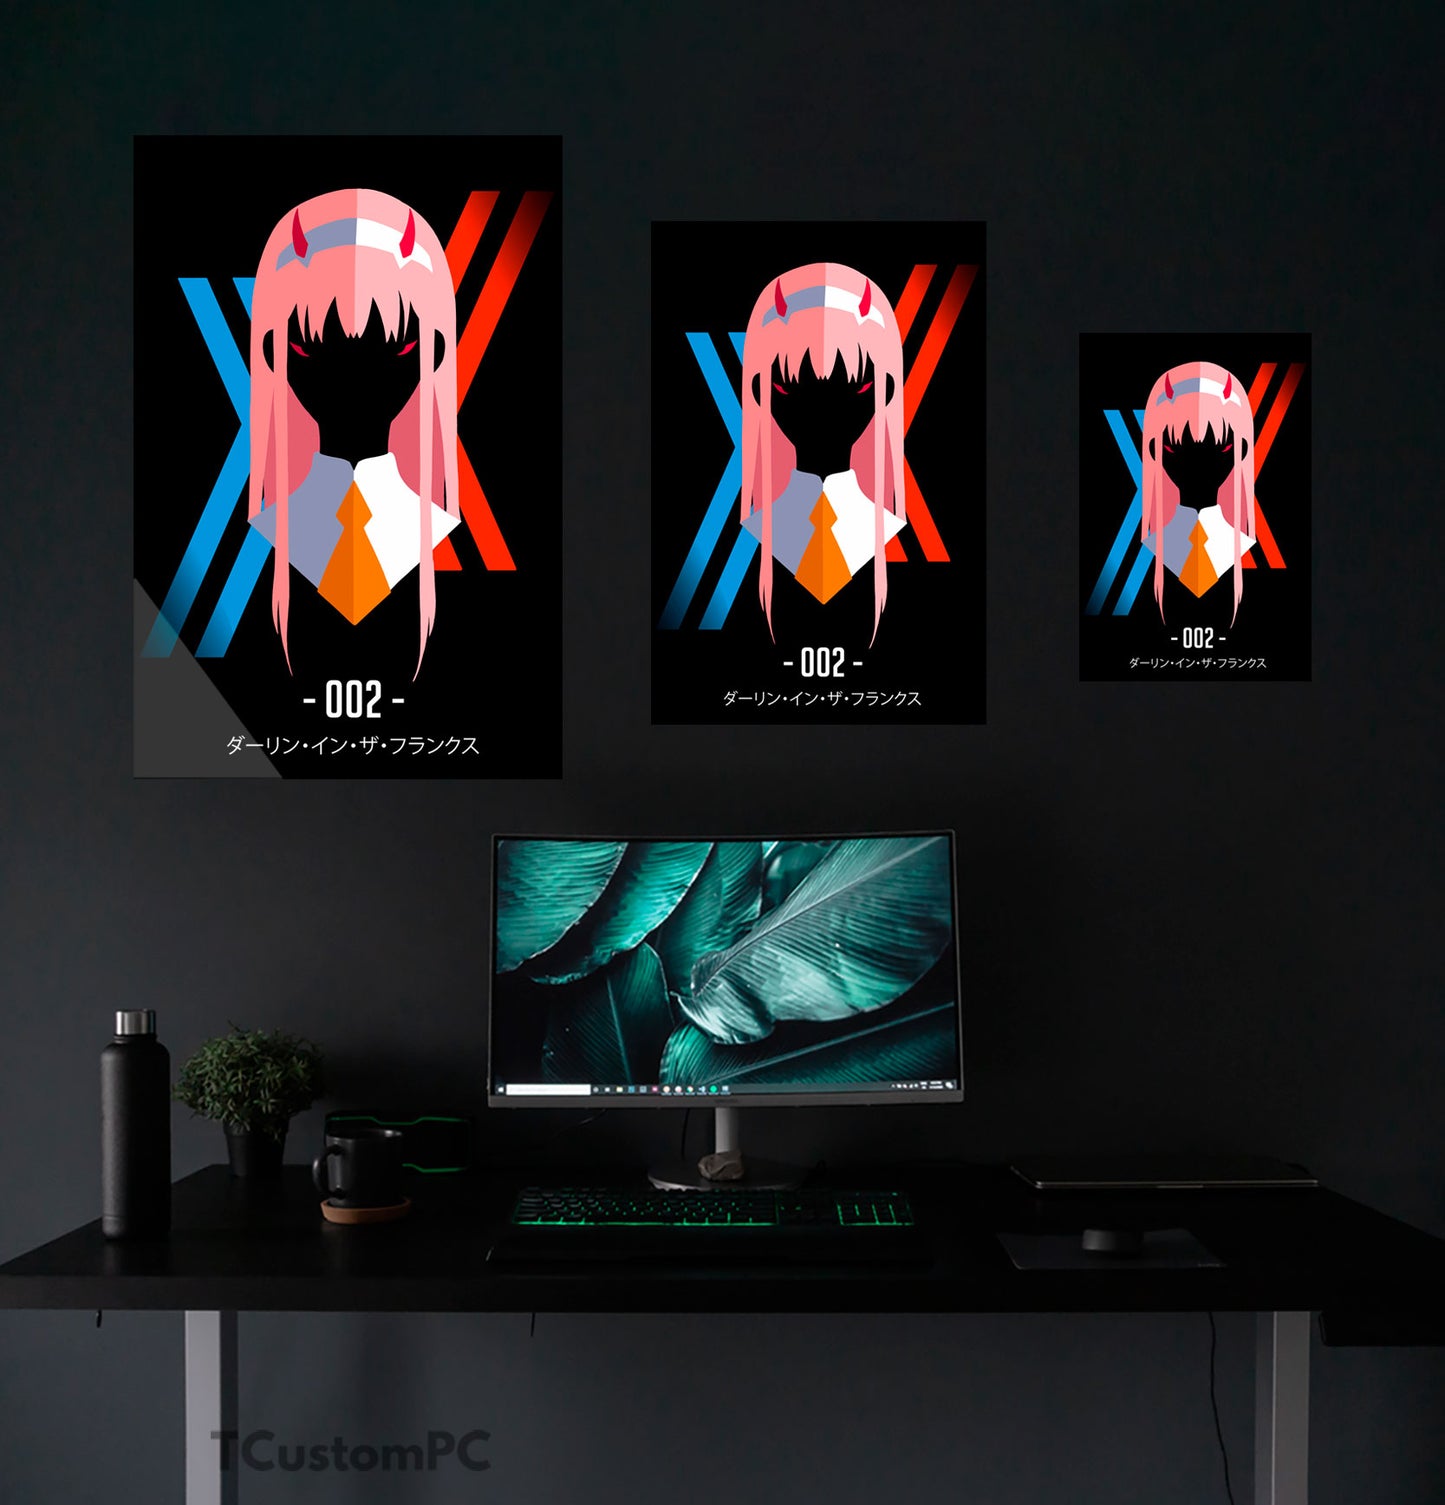 Darling in the Franxx painting, Zero Two "002"